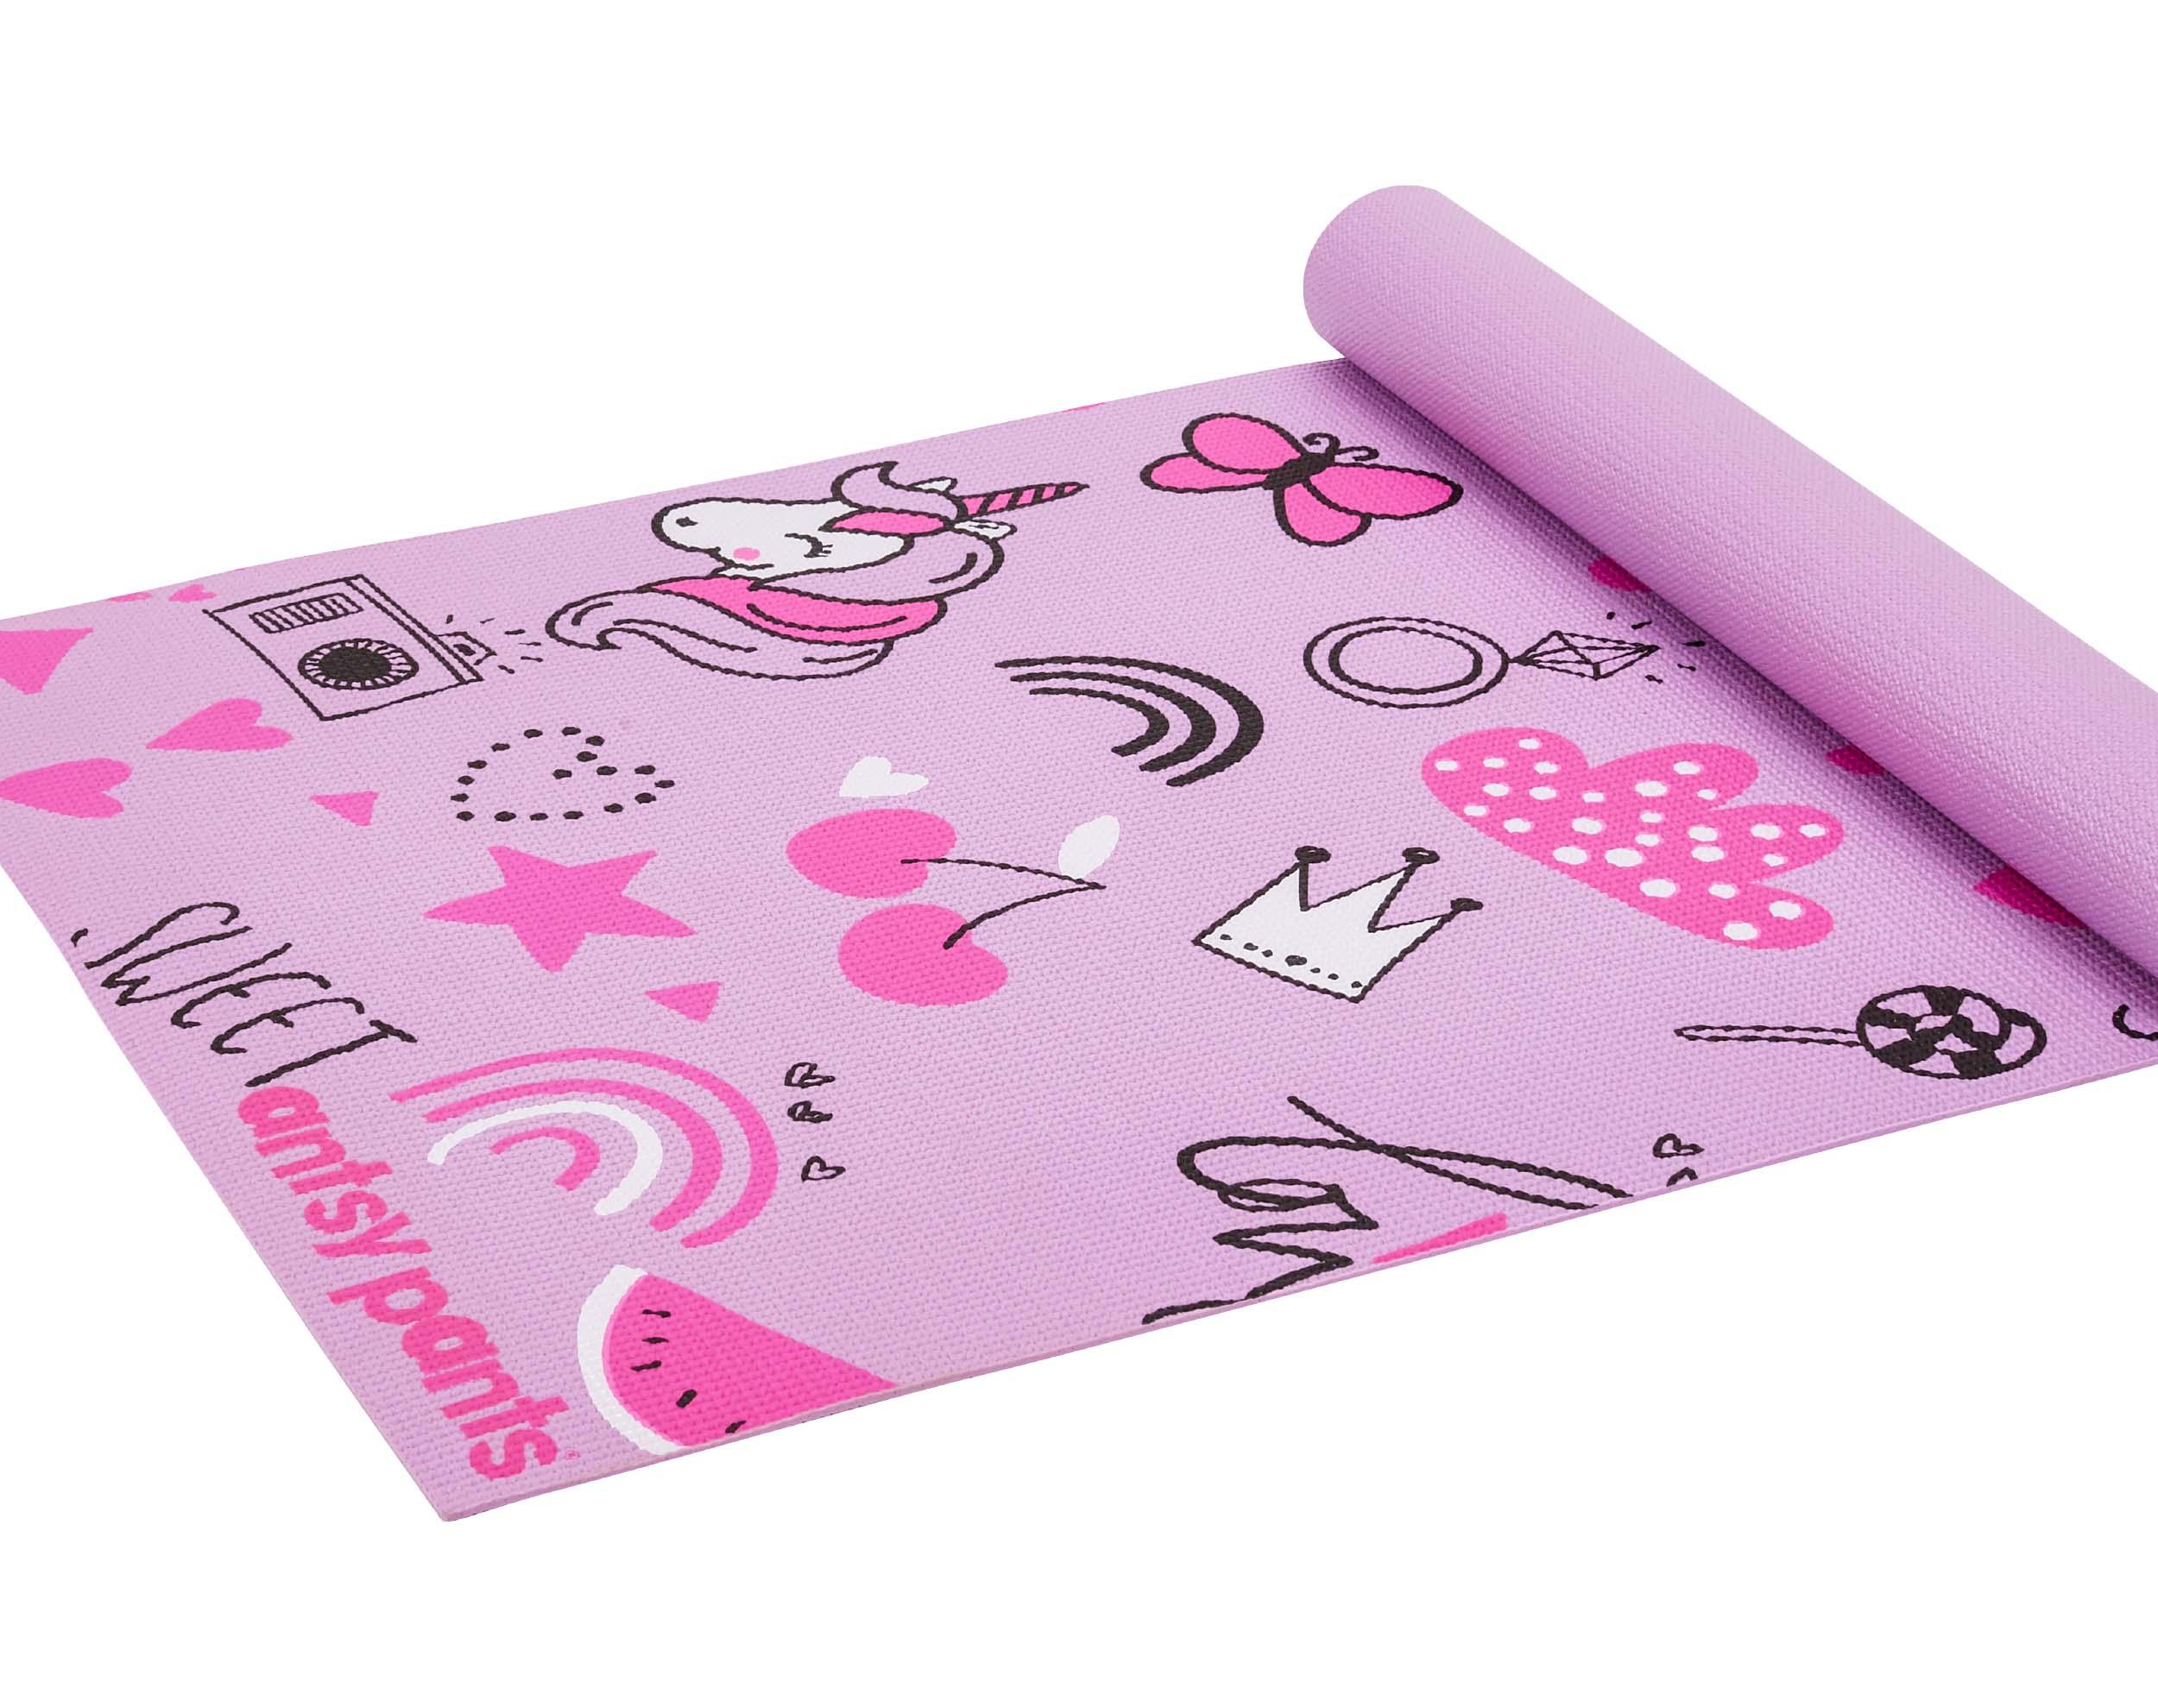 Antsy Pants Yoga Mat for Stretching and Yoga